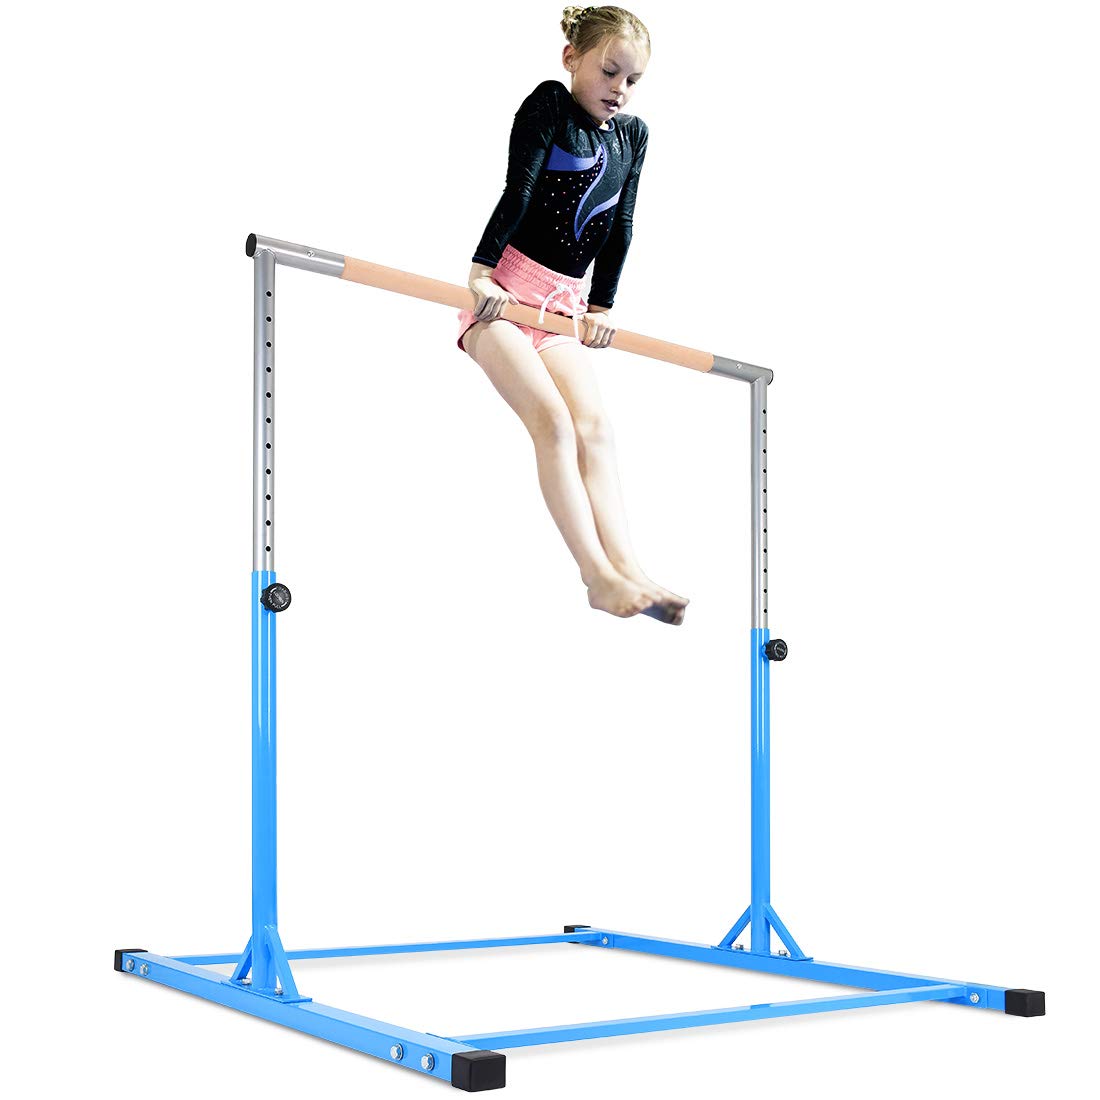 Gymnastics Bar With Solid Wood - Friendly for Kids Play and Practice